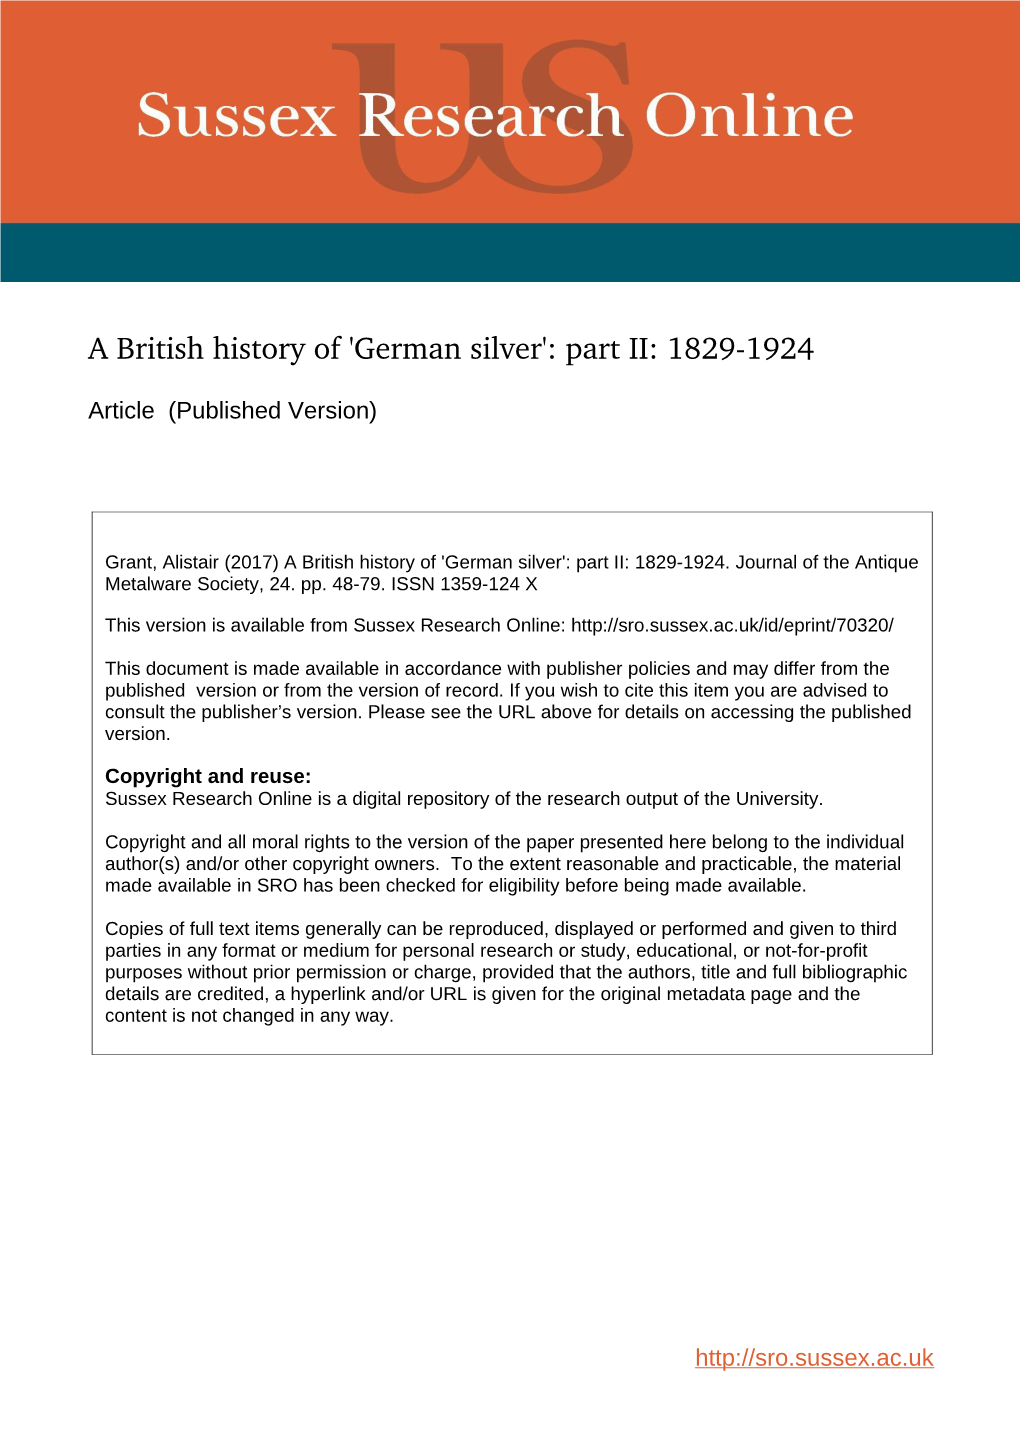 A British History of 'German Silver': Part II: 1829­1924